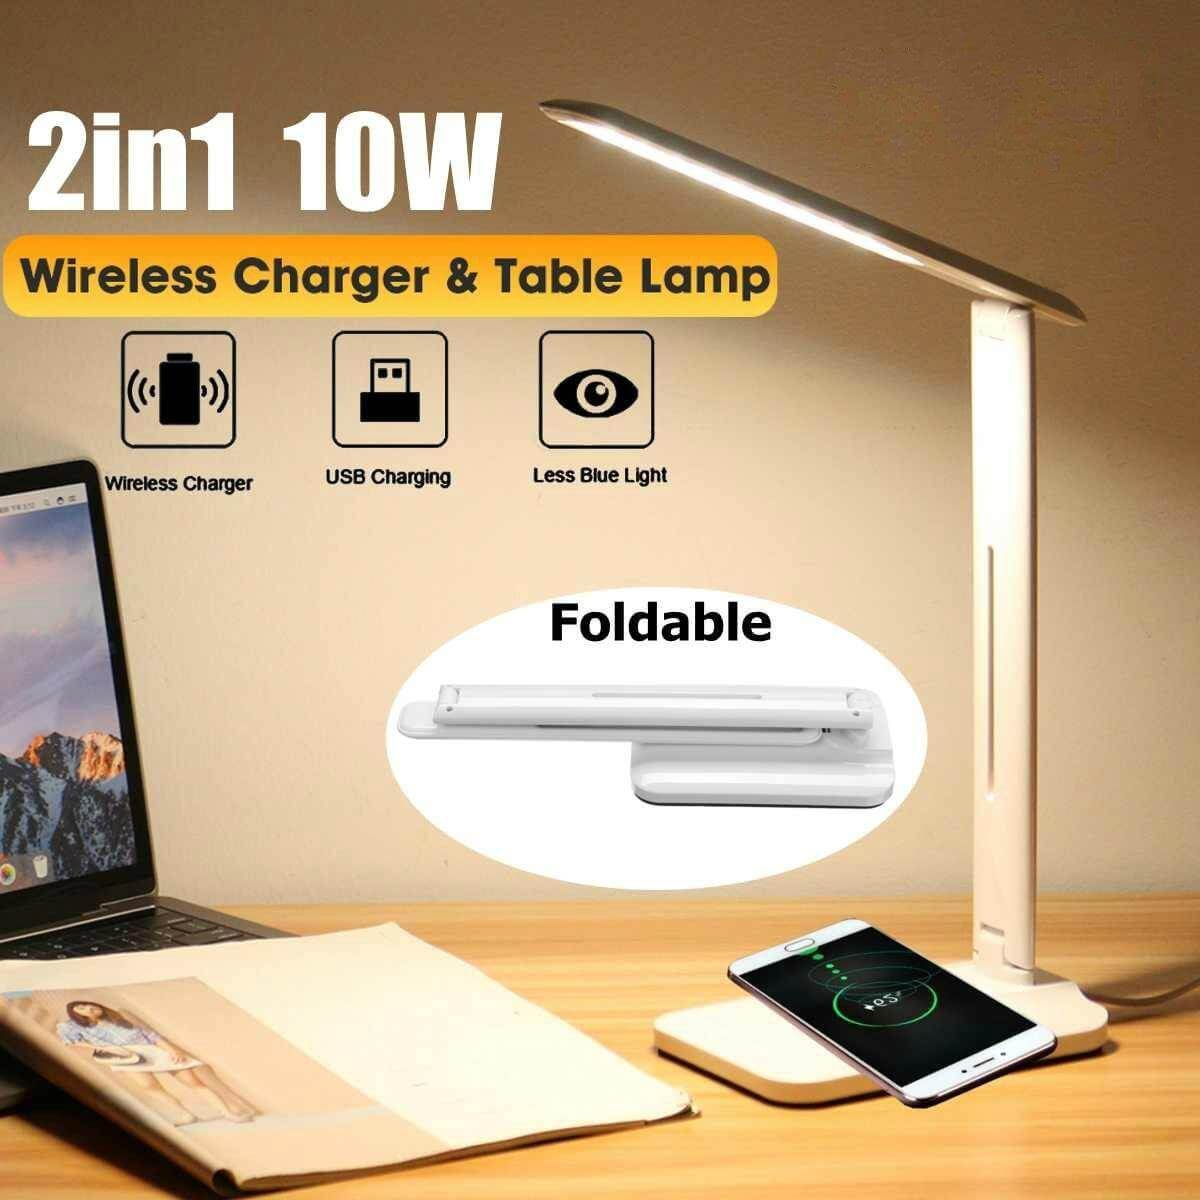 2in1 Multifunctional Fast Wireless Charging LED Table Lamp - MaviGadget